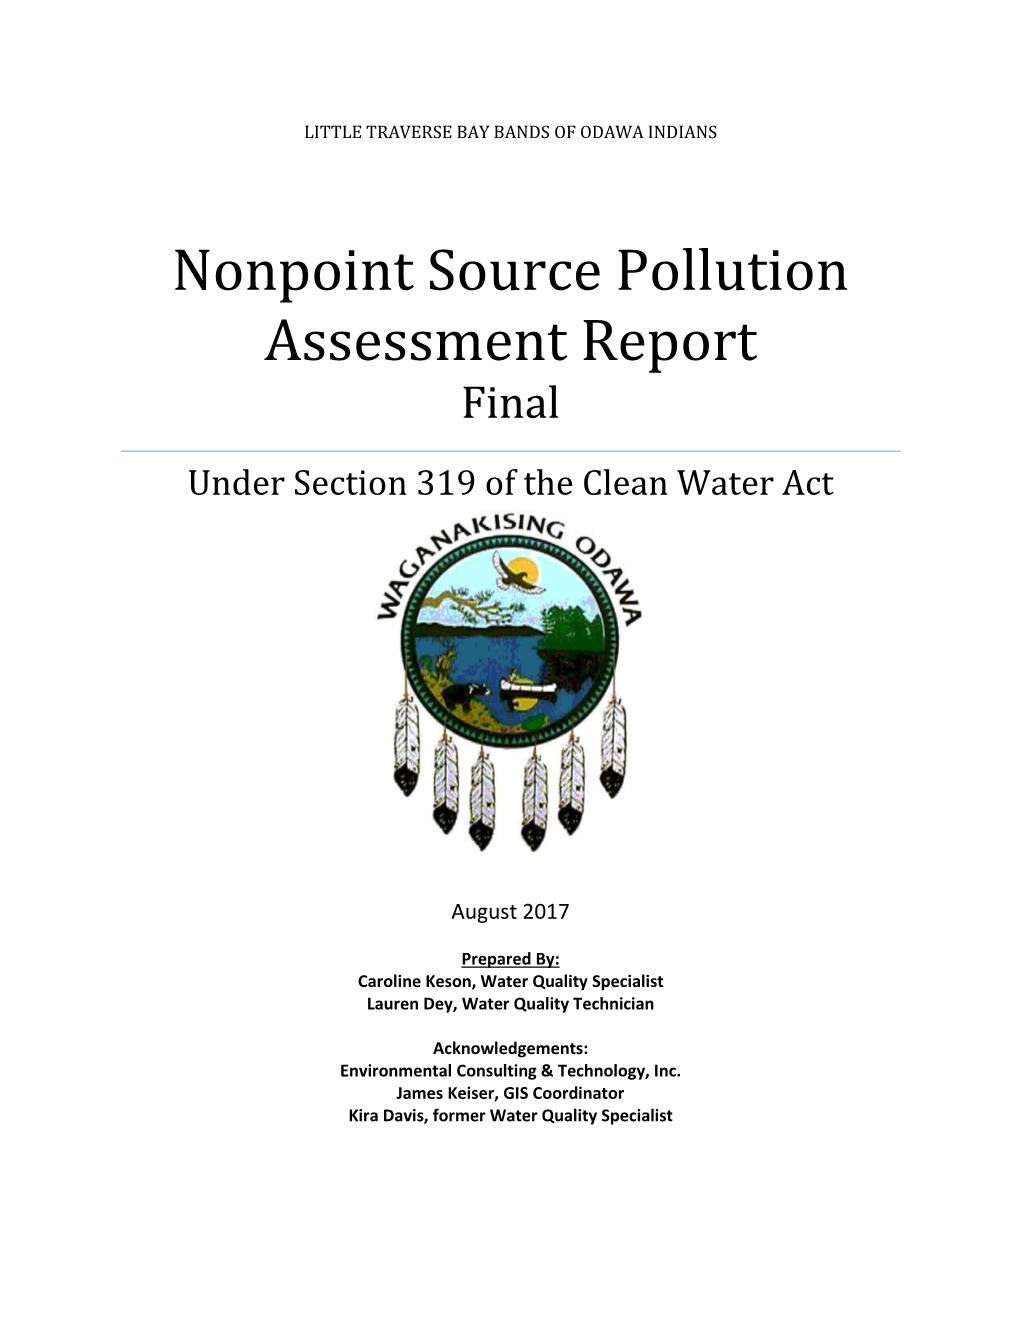 Nonpoint Source Pollution Assessment Report Final